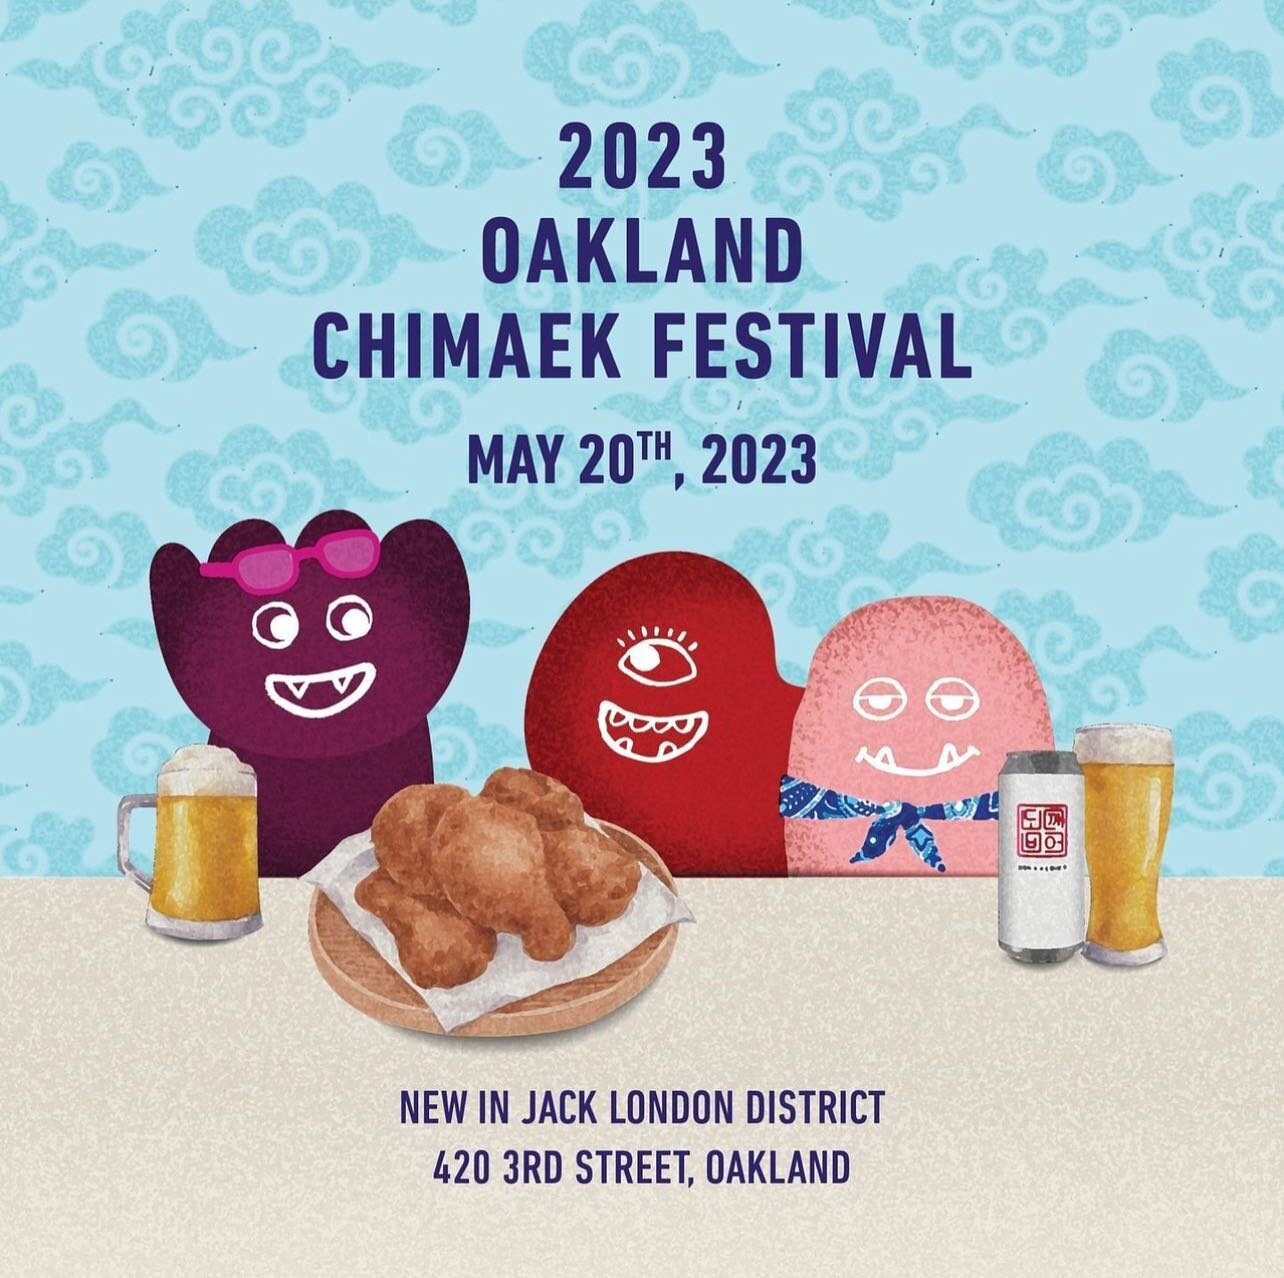 We are proud to be sponsoring @dokkaebier&rsquo;s first annual Chimaek Festival this Saturday, May 20th in our district! 

Chimaek means &ldquo;chicken and beer&rdquo; in Korea, where there is a tradition of celebrating these two delicious things in 